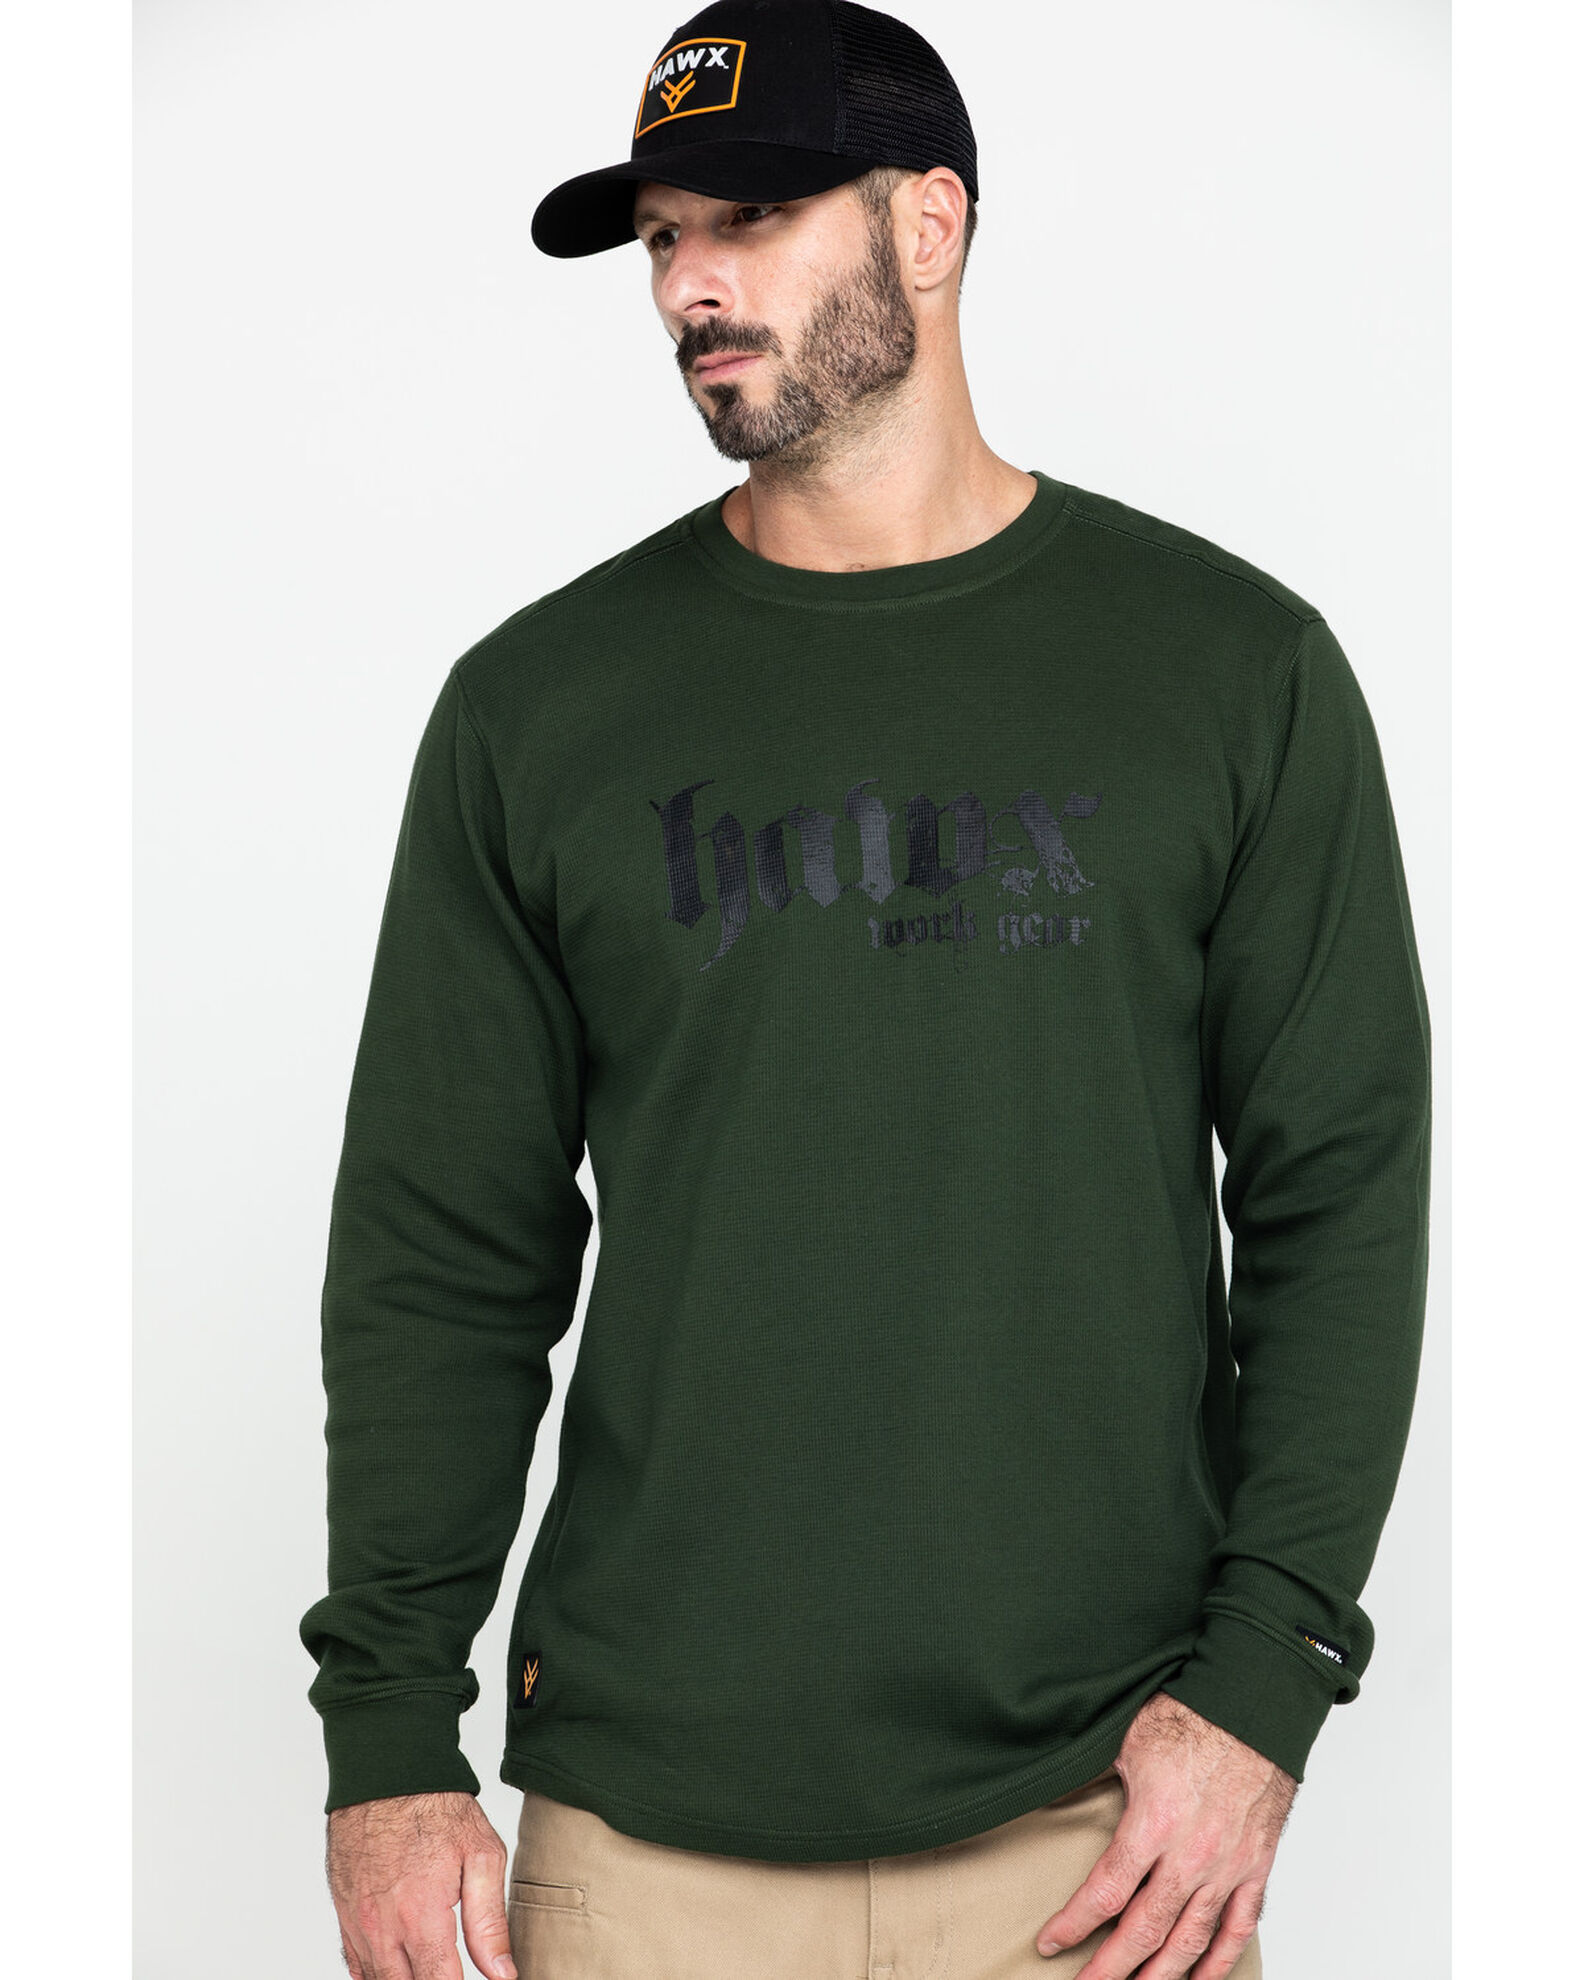 Levi's Waffle Knit Thermal Long Sleeve T-shirt In Green For Men Lyst |  Thermal Long Sleeve T-shirt For Men 